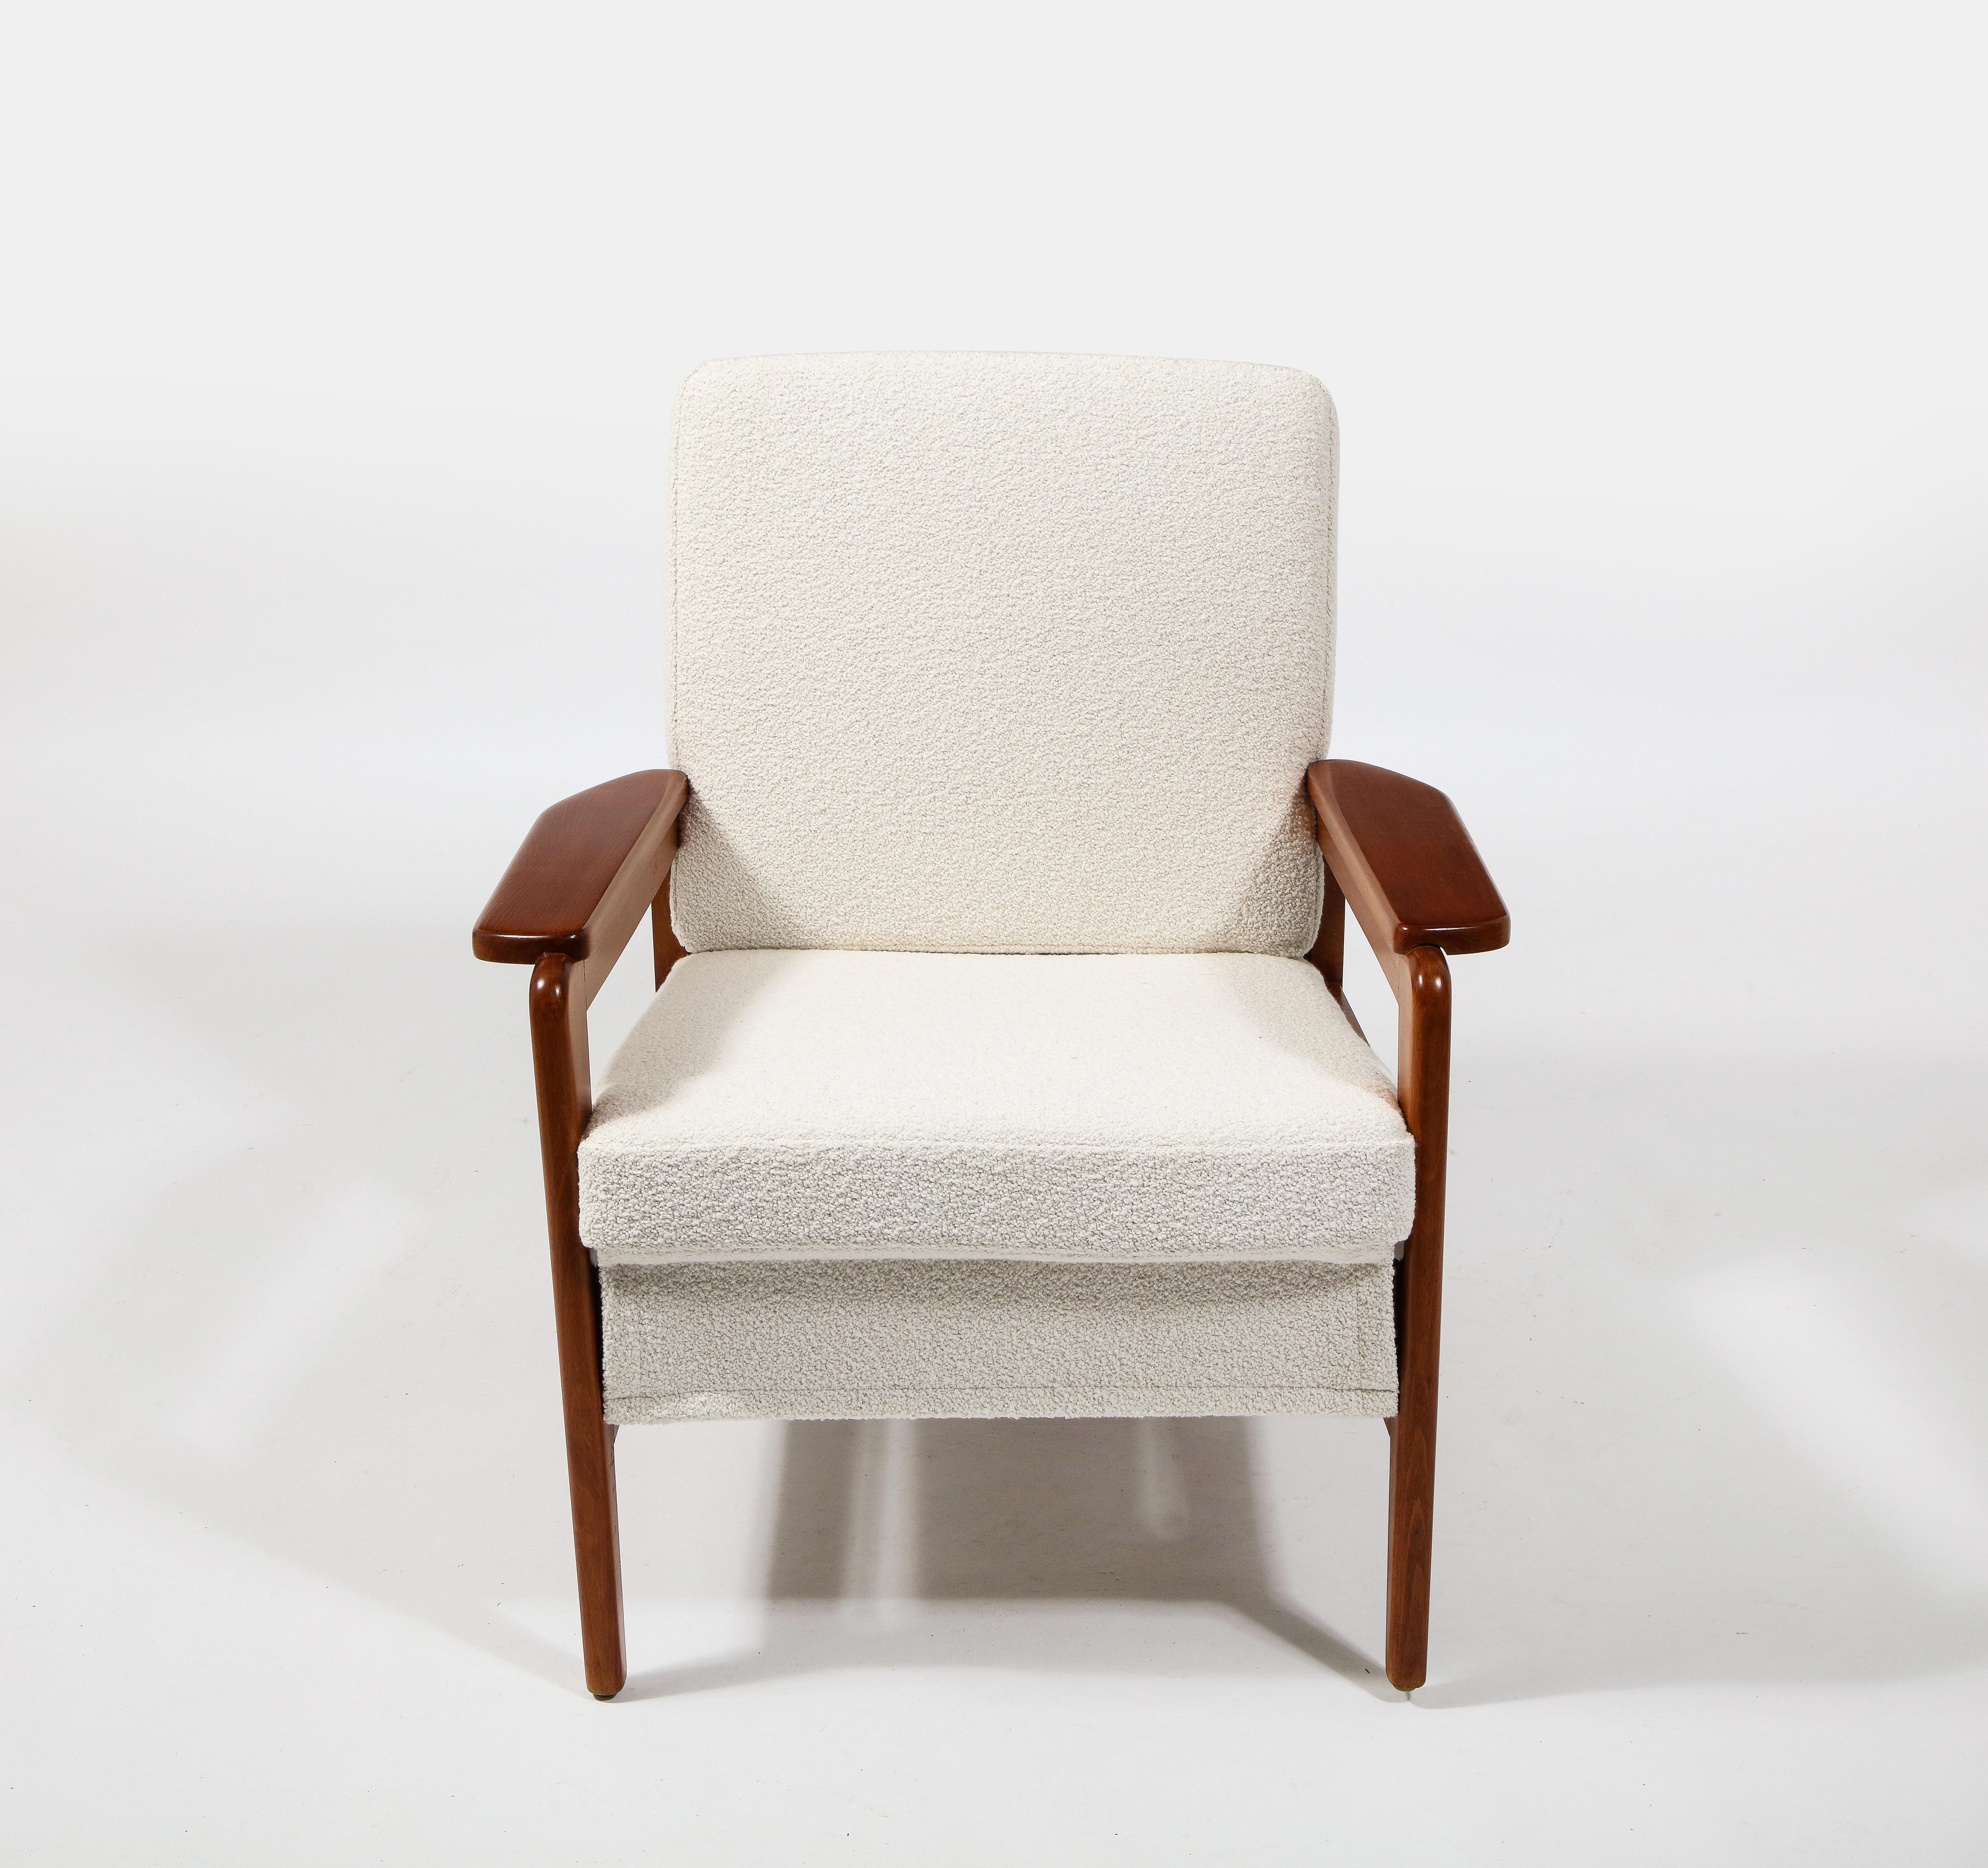 Freespan Pair of Walnut Frame Modern Armchairs in White Bouclé, France 1960's For Sale 6